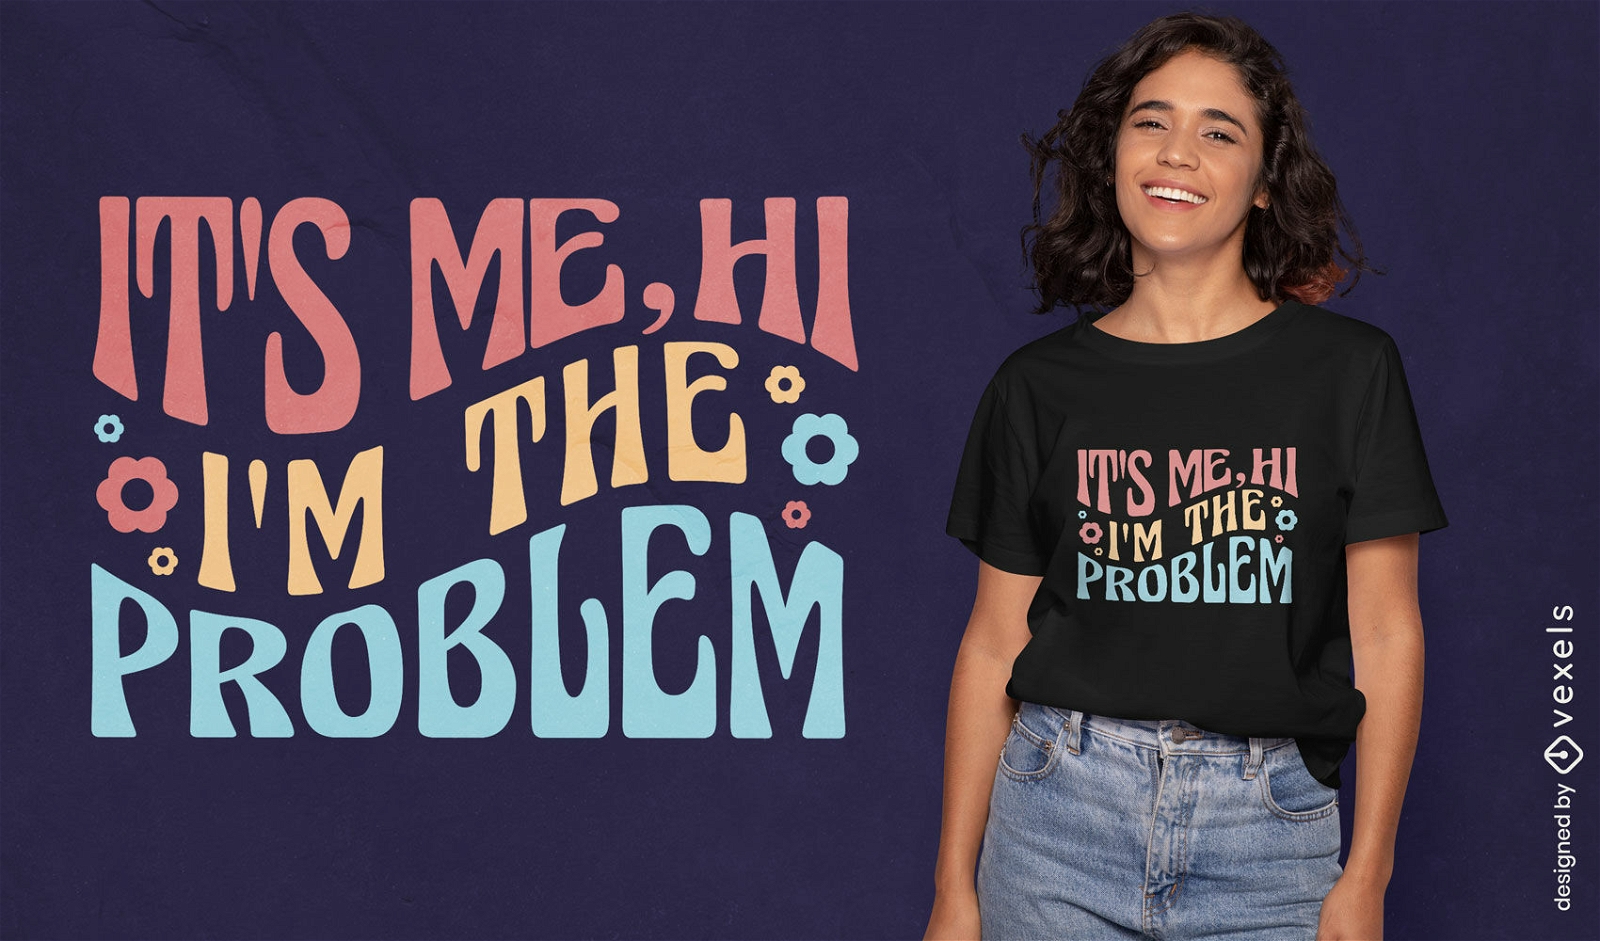 I'm the problem groovy quote t-shirt design